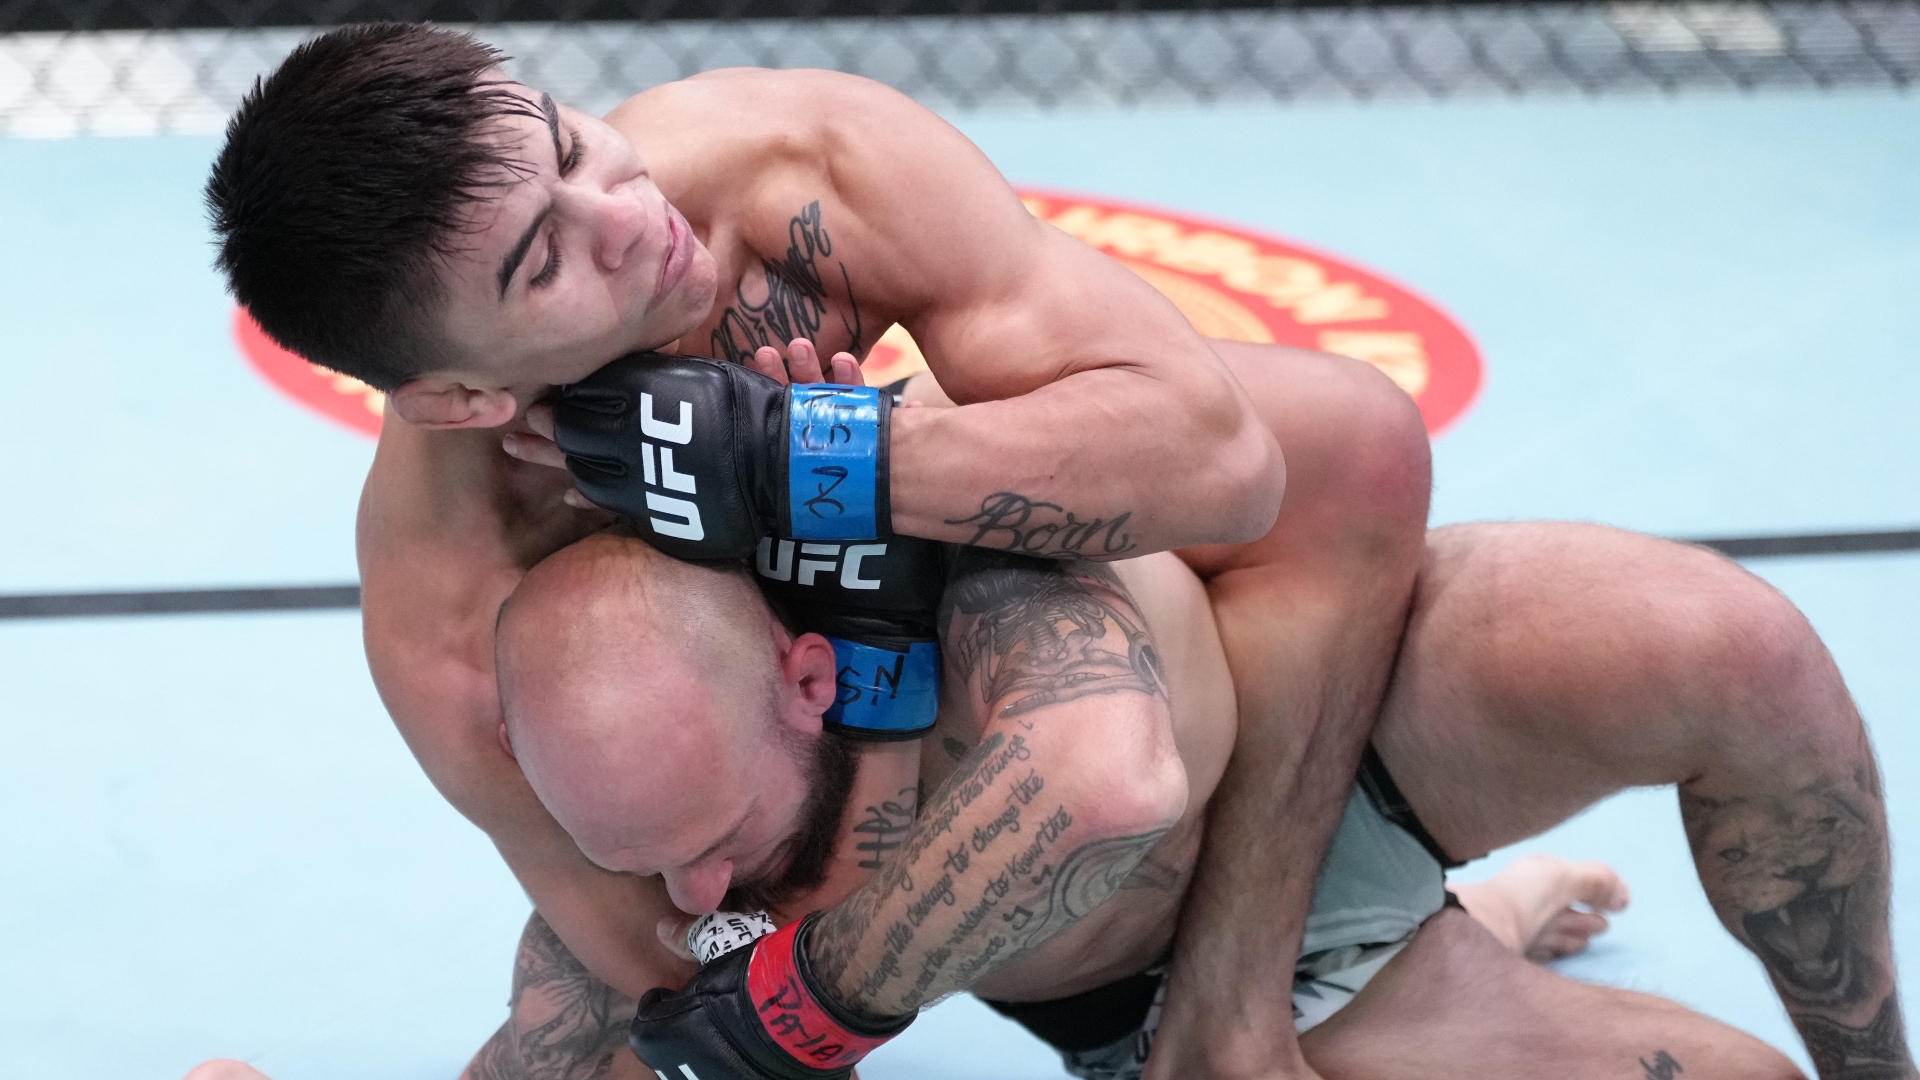 Mario Bautista gets Brian Kelleher to tap in Round 1 - Stream the Video